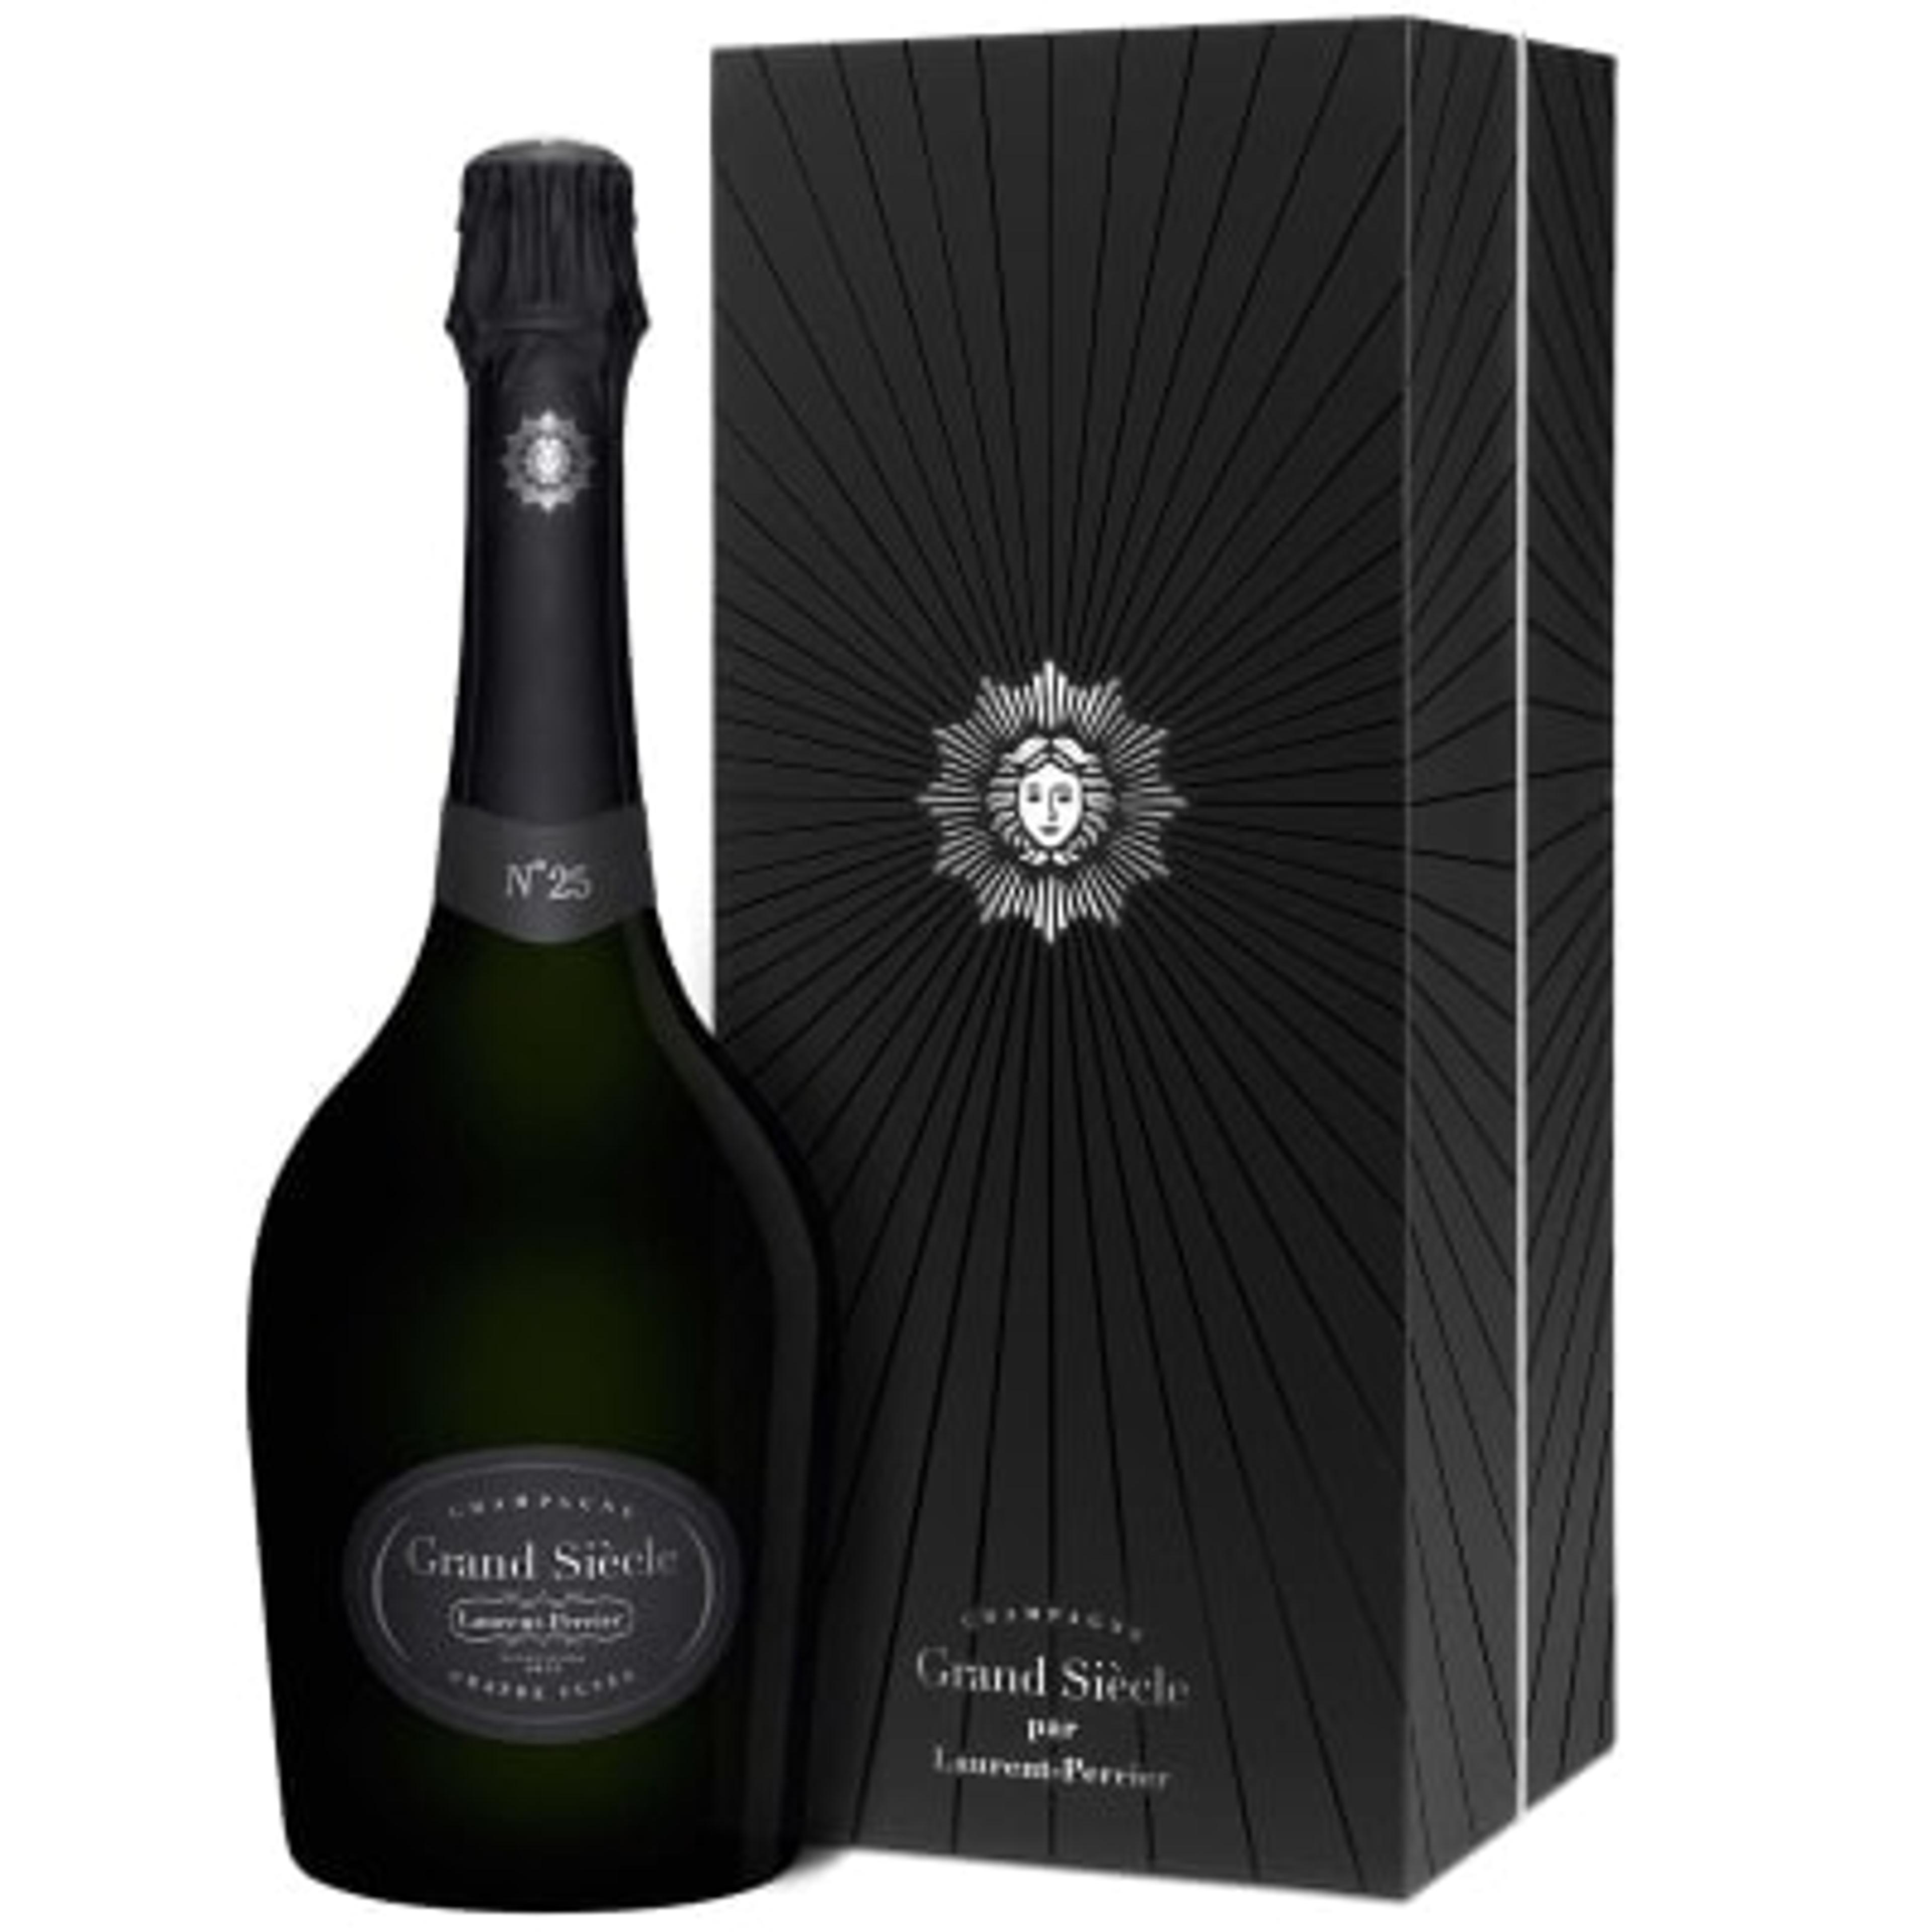 Laurent-Perrier Grand Siecle No. 25 with Gift Box | Wine.com